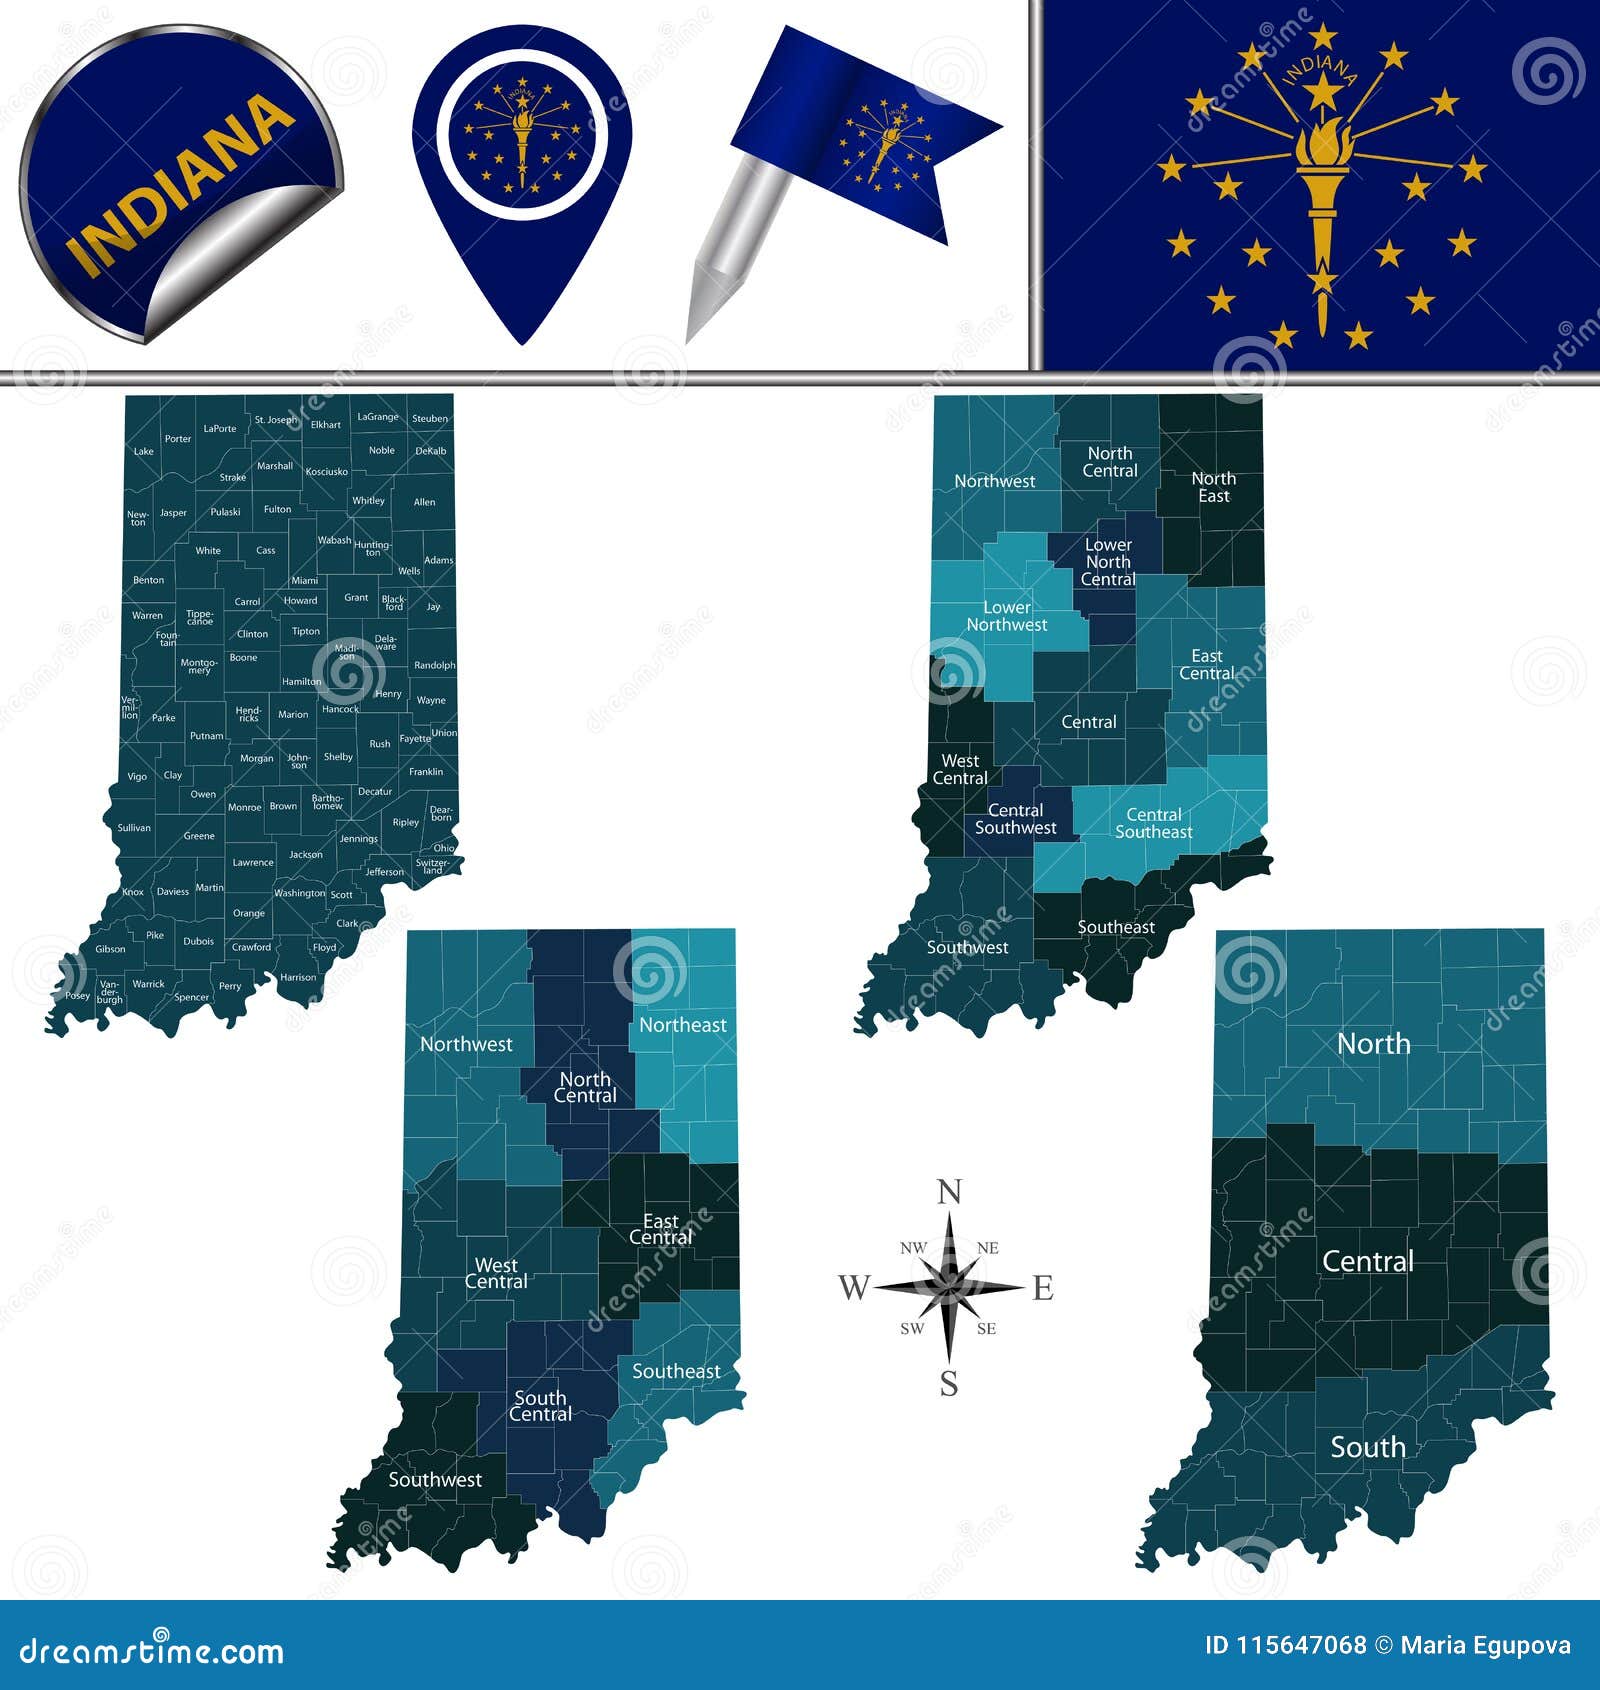 indiana regions map vector central